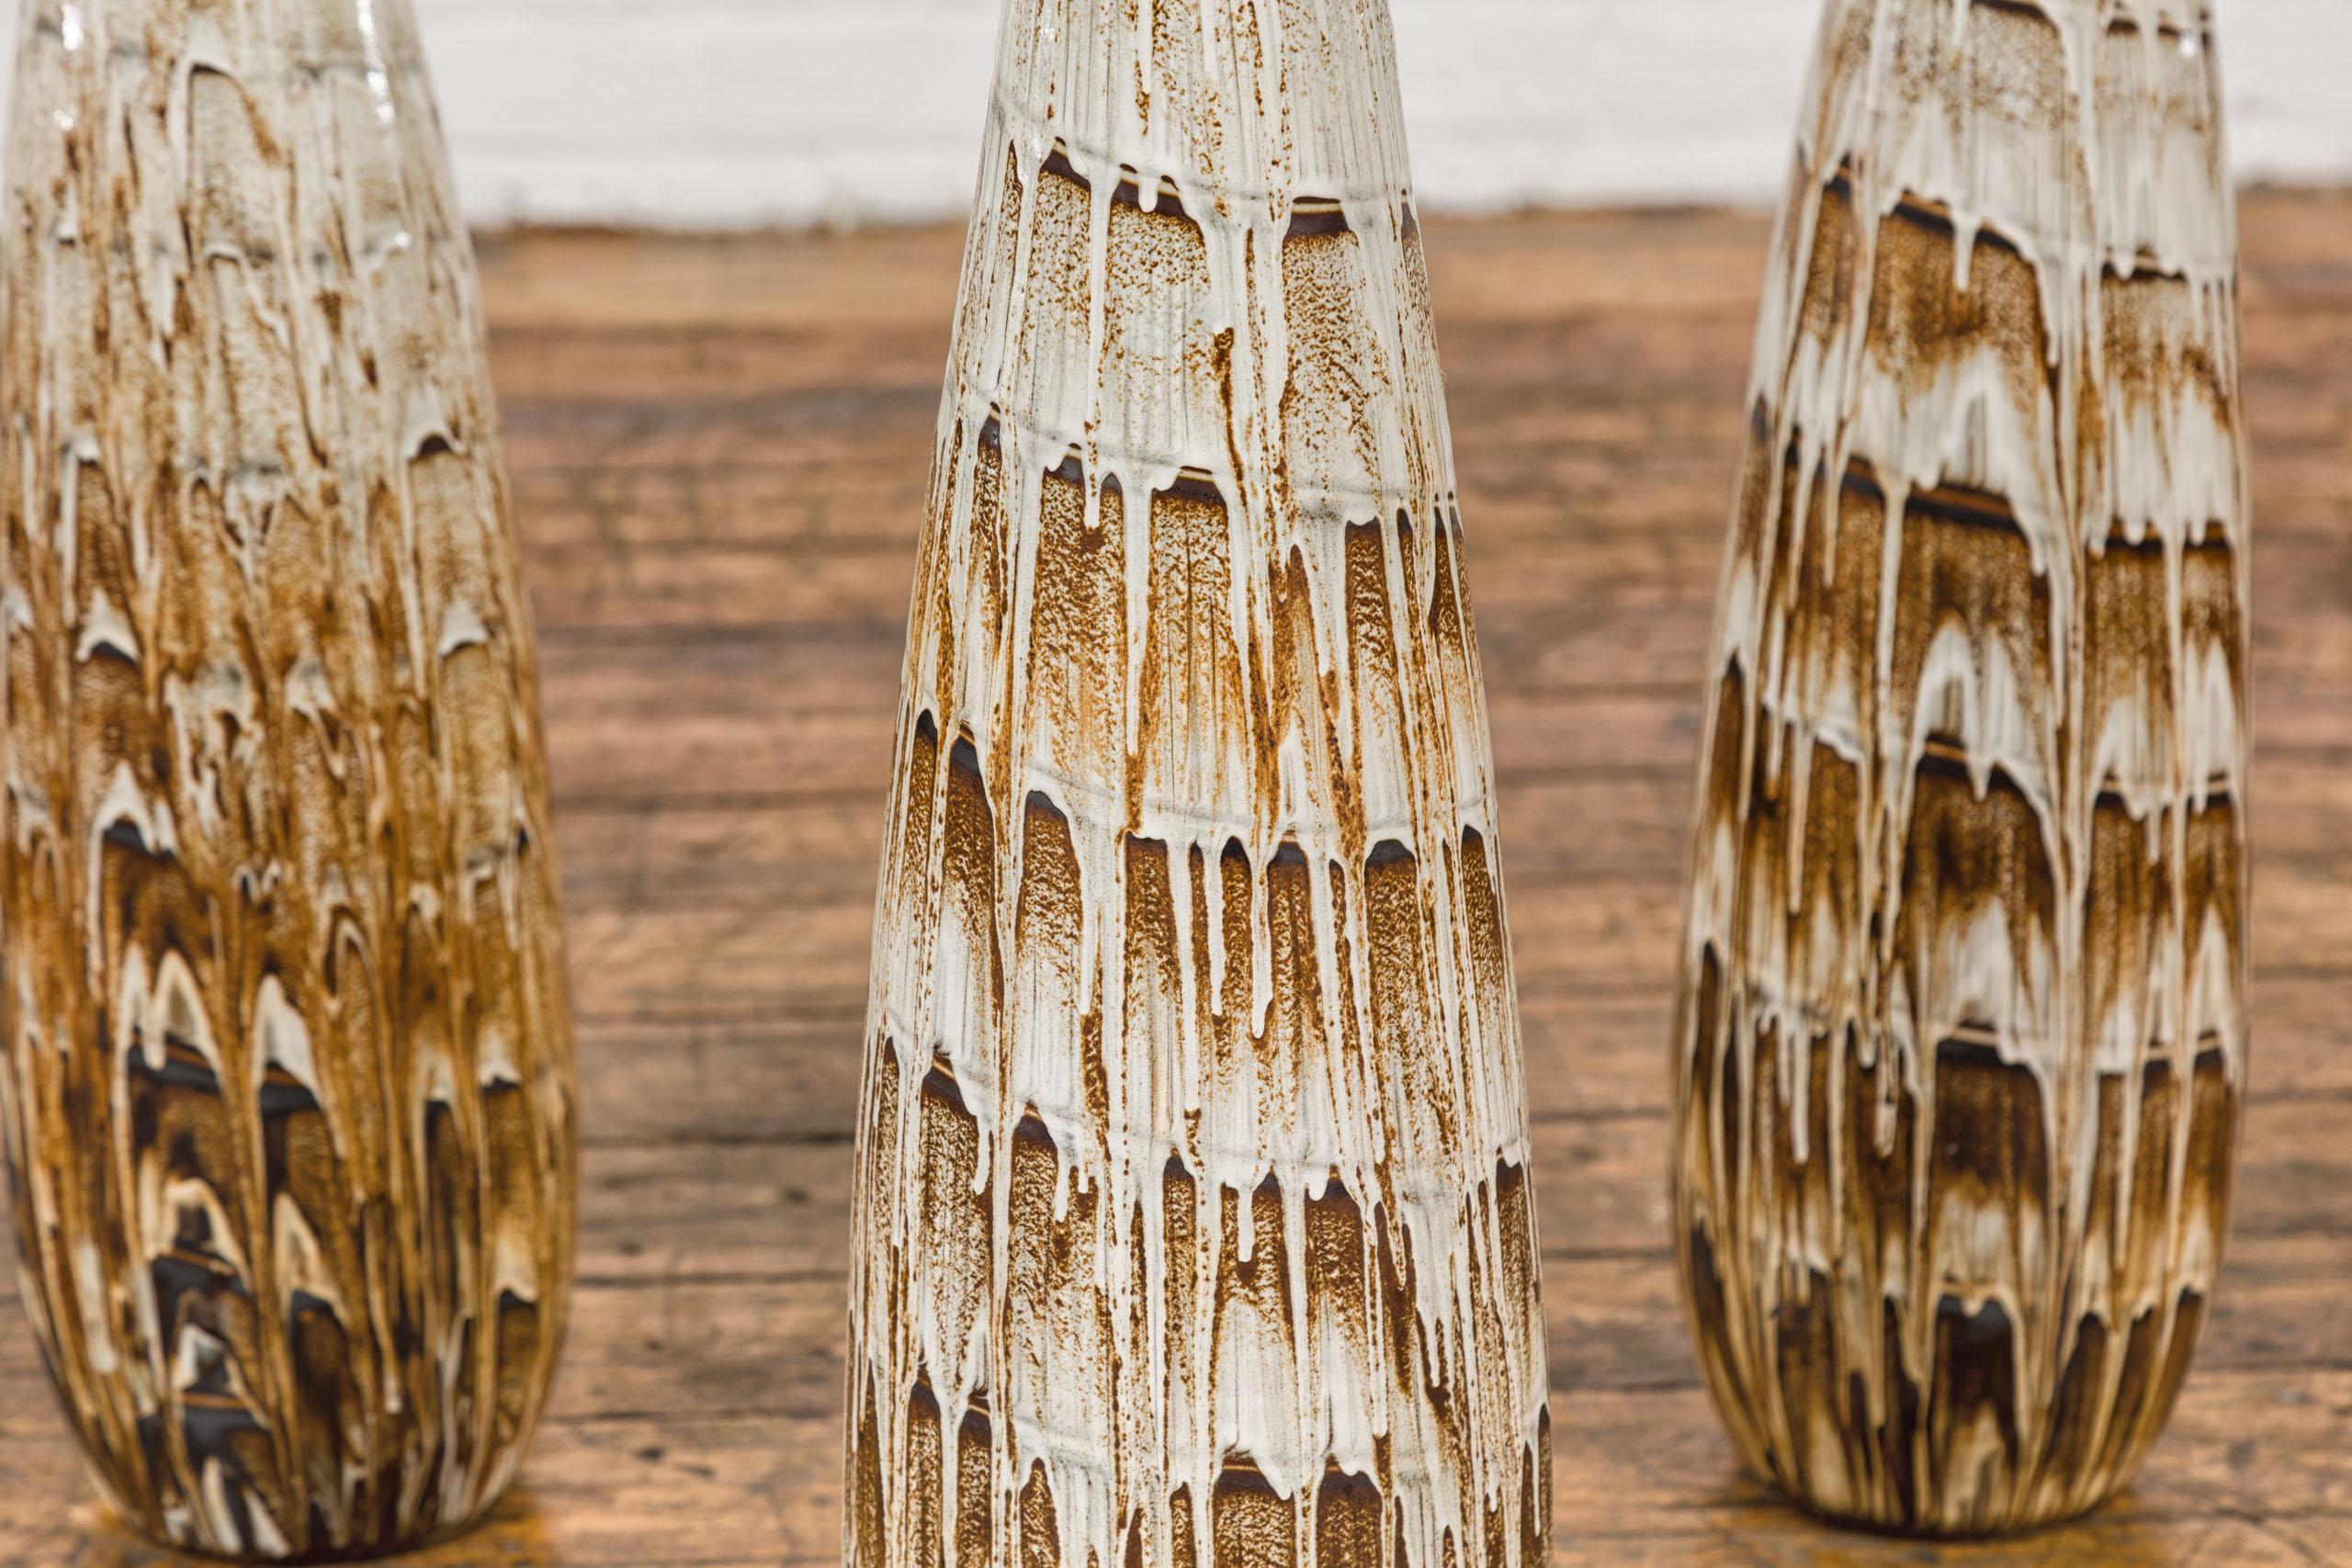 Slender Ceramic Vases with Spiraling Motifs and Brown Drip Glaze, Sold Each For Sale 7